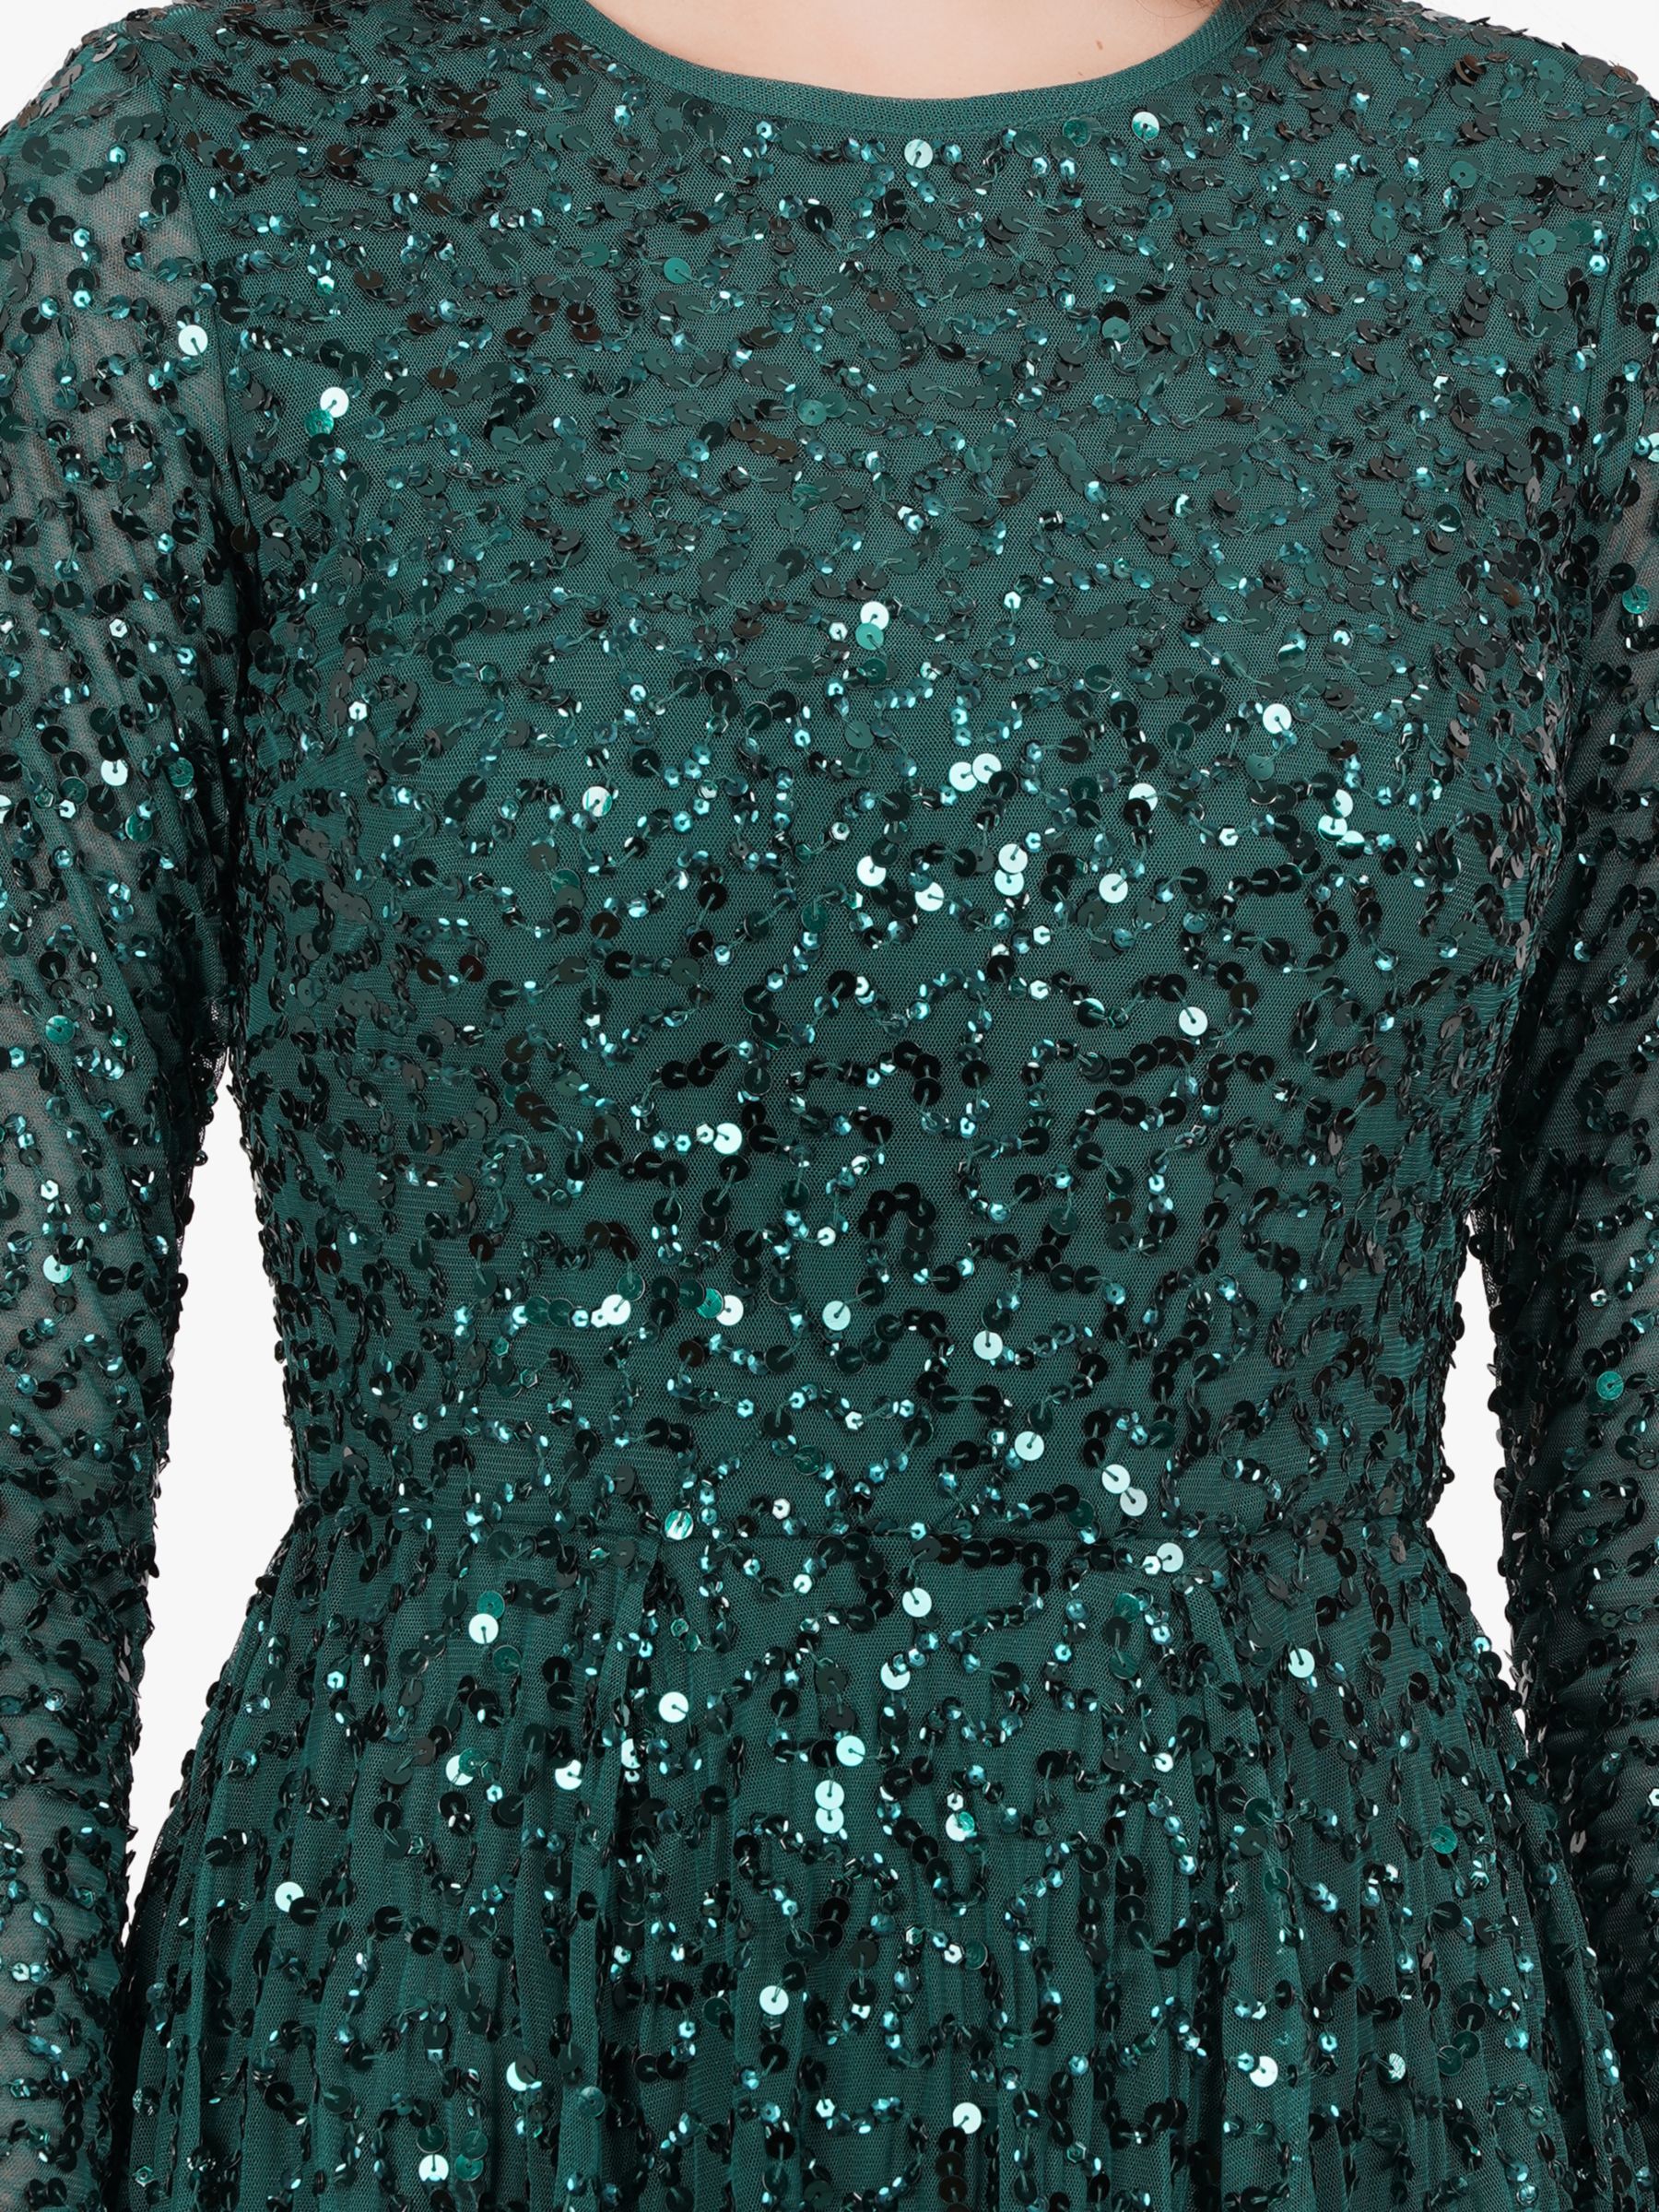 Sila Long Sleeve Embellished Maxi Dress in Emerald Green – Lace